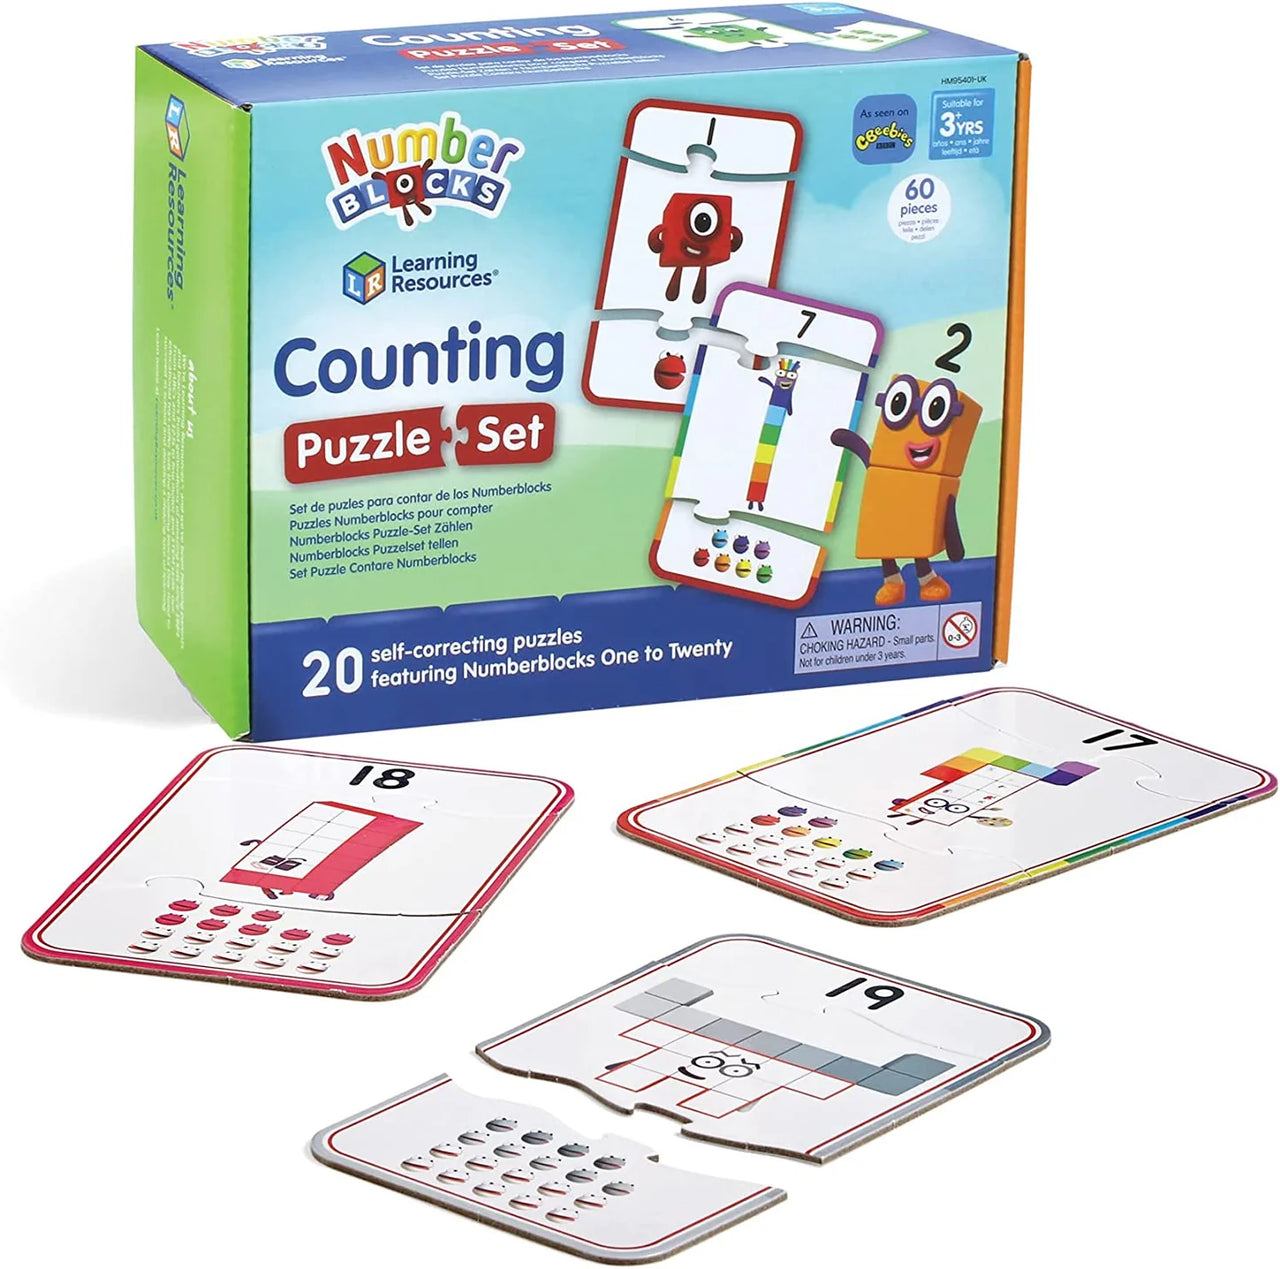 Numberblocks - Counting Puzzle Set